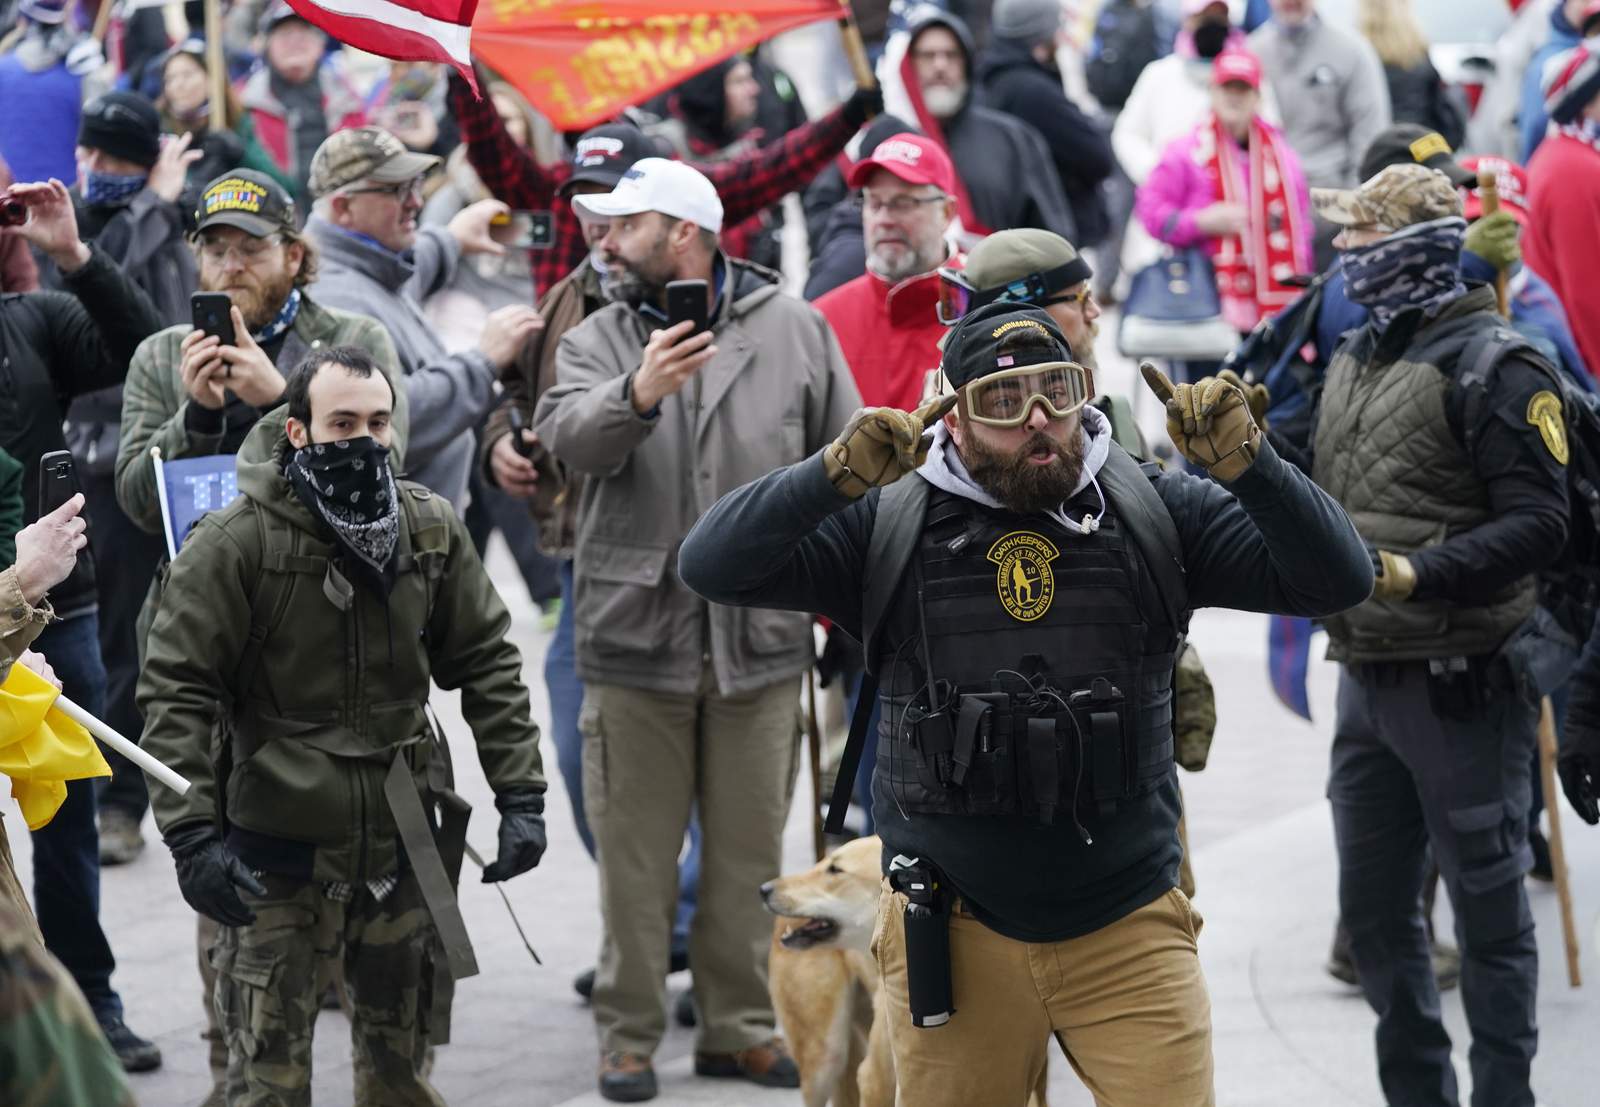 Reports: FBI warns of possible armed protests at 50 state Capitols starting Jan. 16